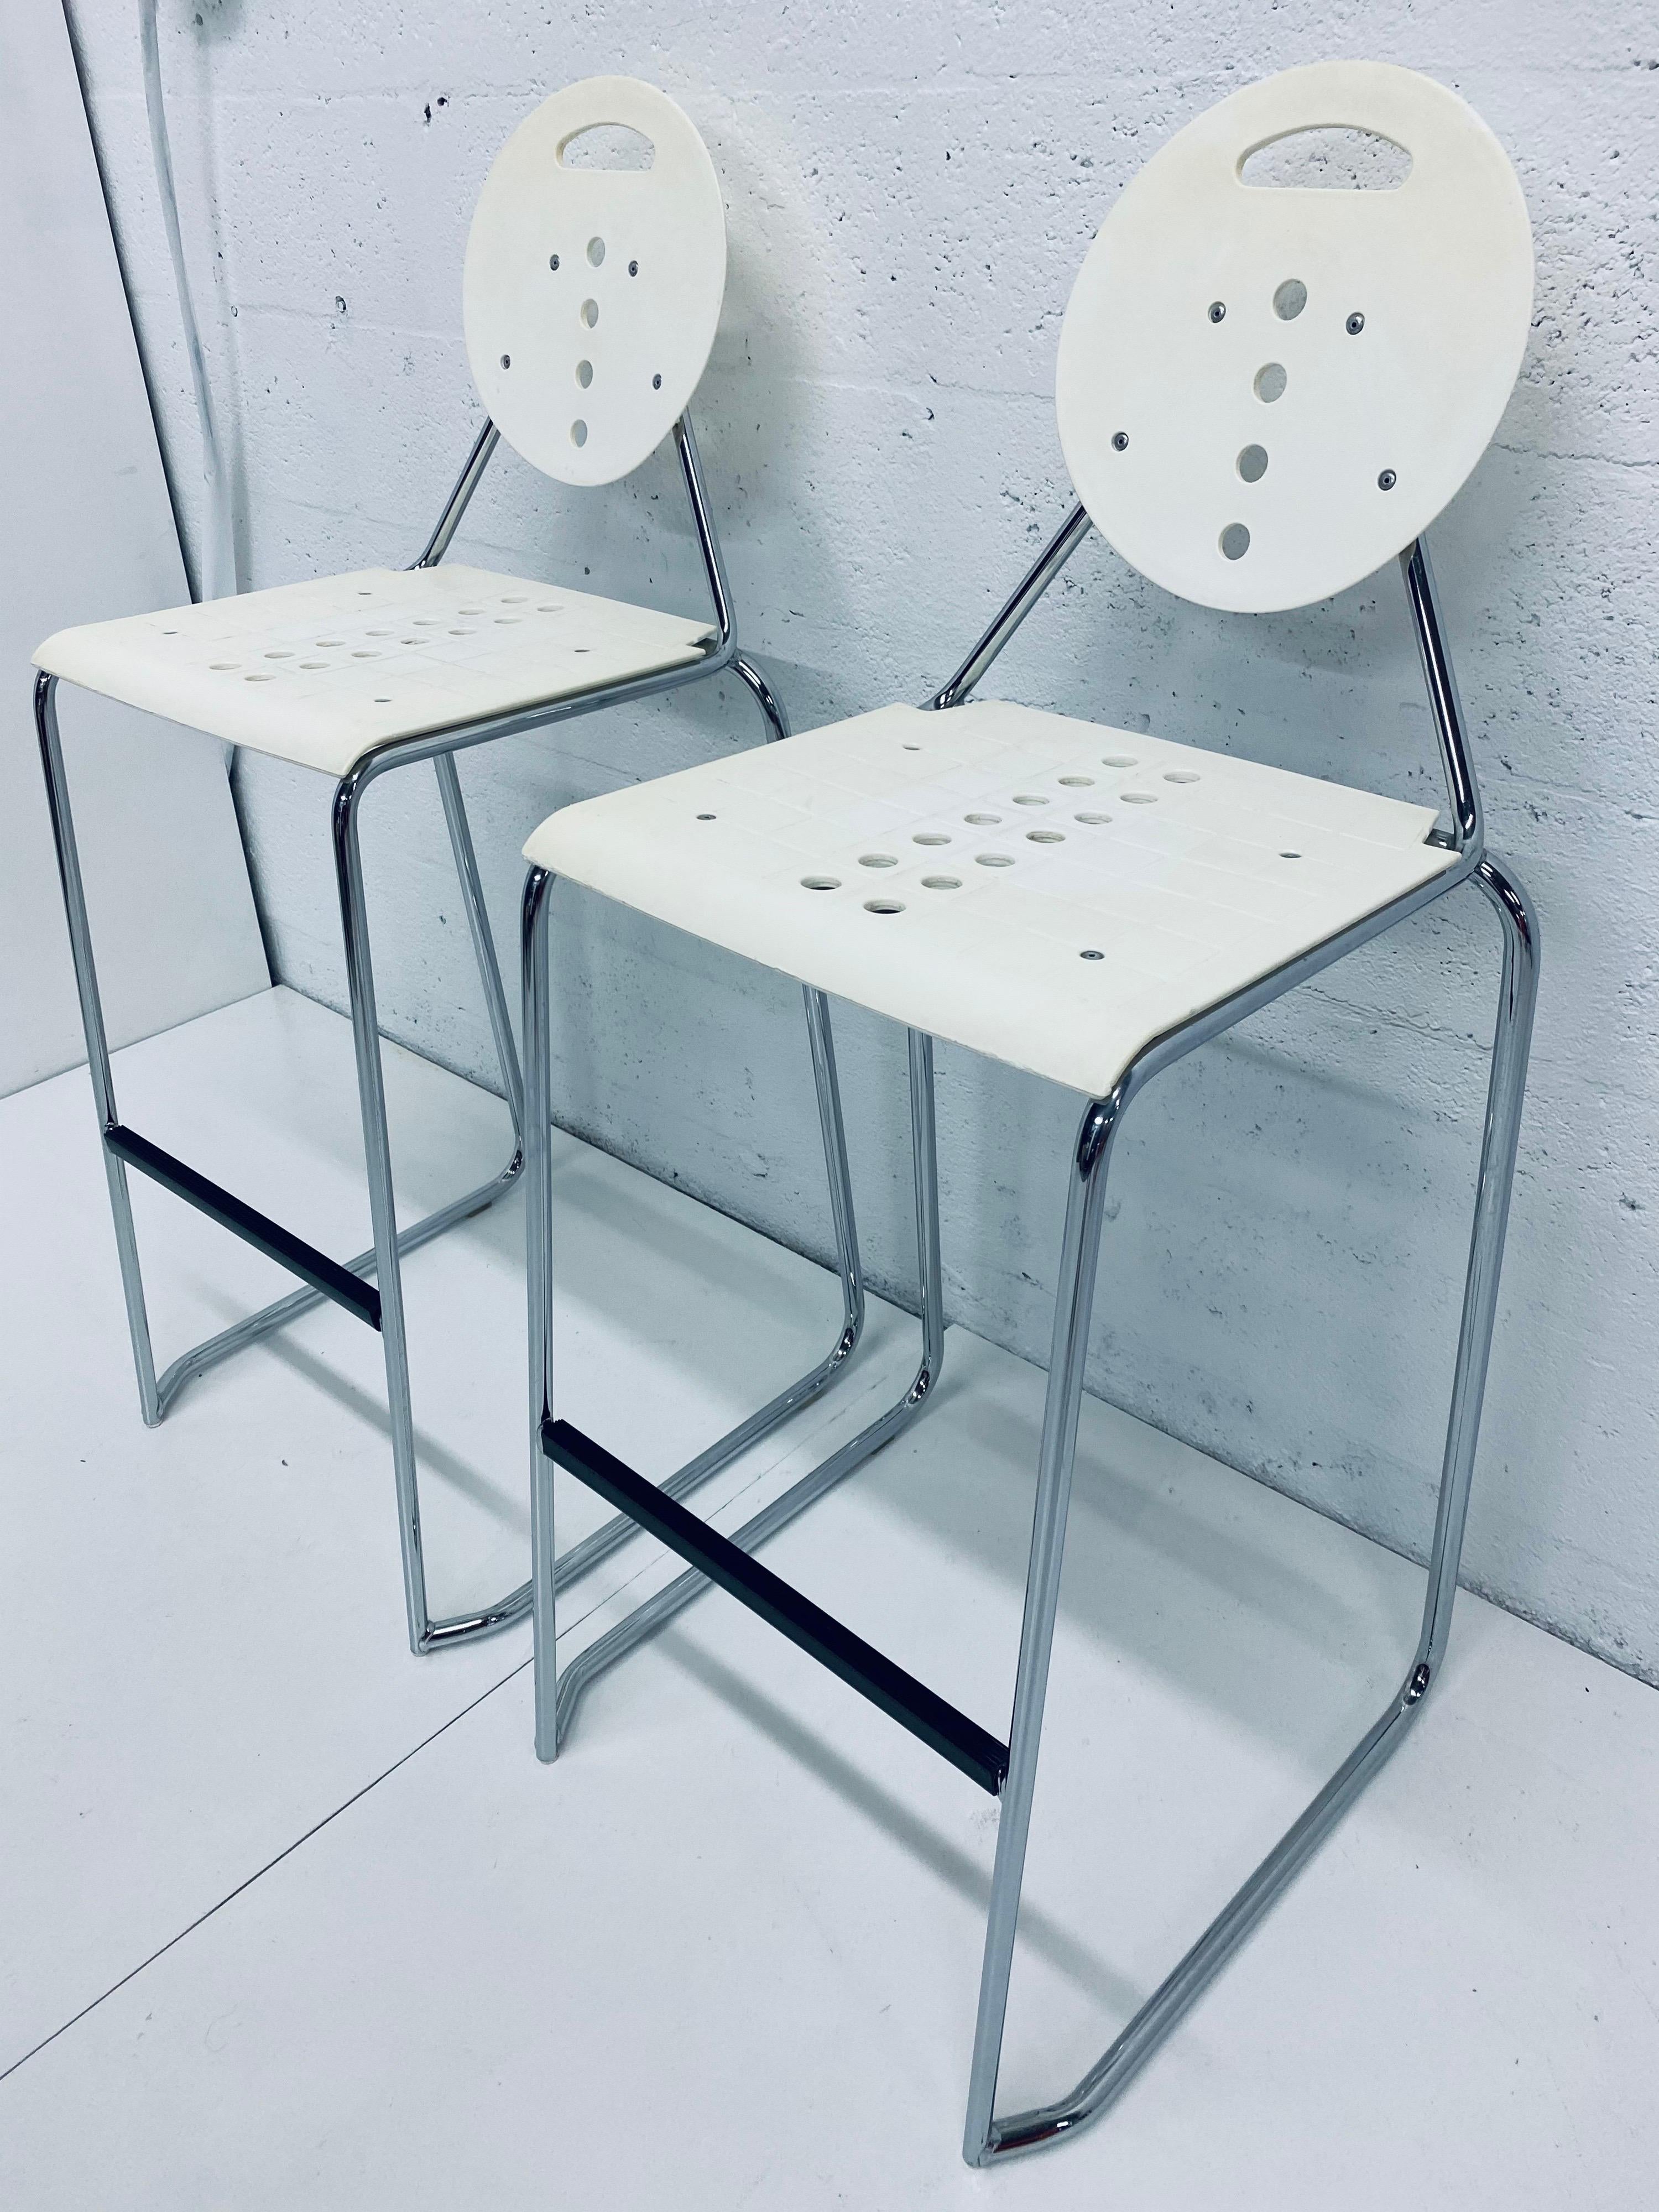 Pair of Postmodern Memphis style barstools by Carlo Bimbi and Nilo Gioacchini for Segis Italia, circa 1980s. Chairs are made of white moulded plastic attached to a tubular chrome frame. The chairs stack for easy storage. Some yellowing to plastic